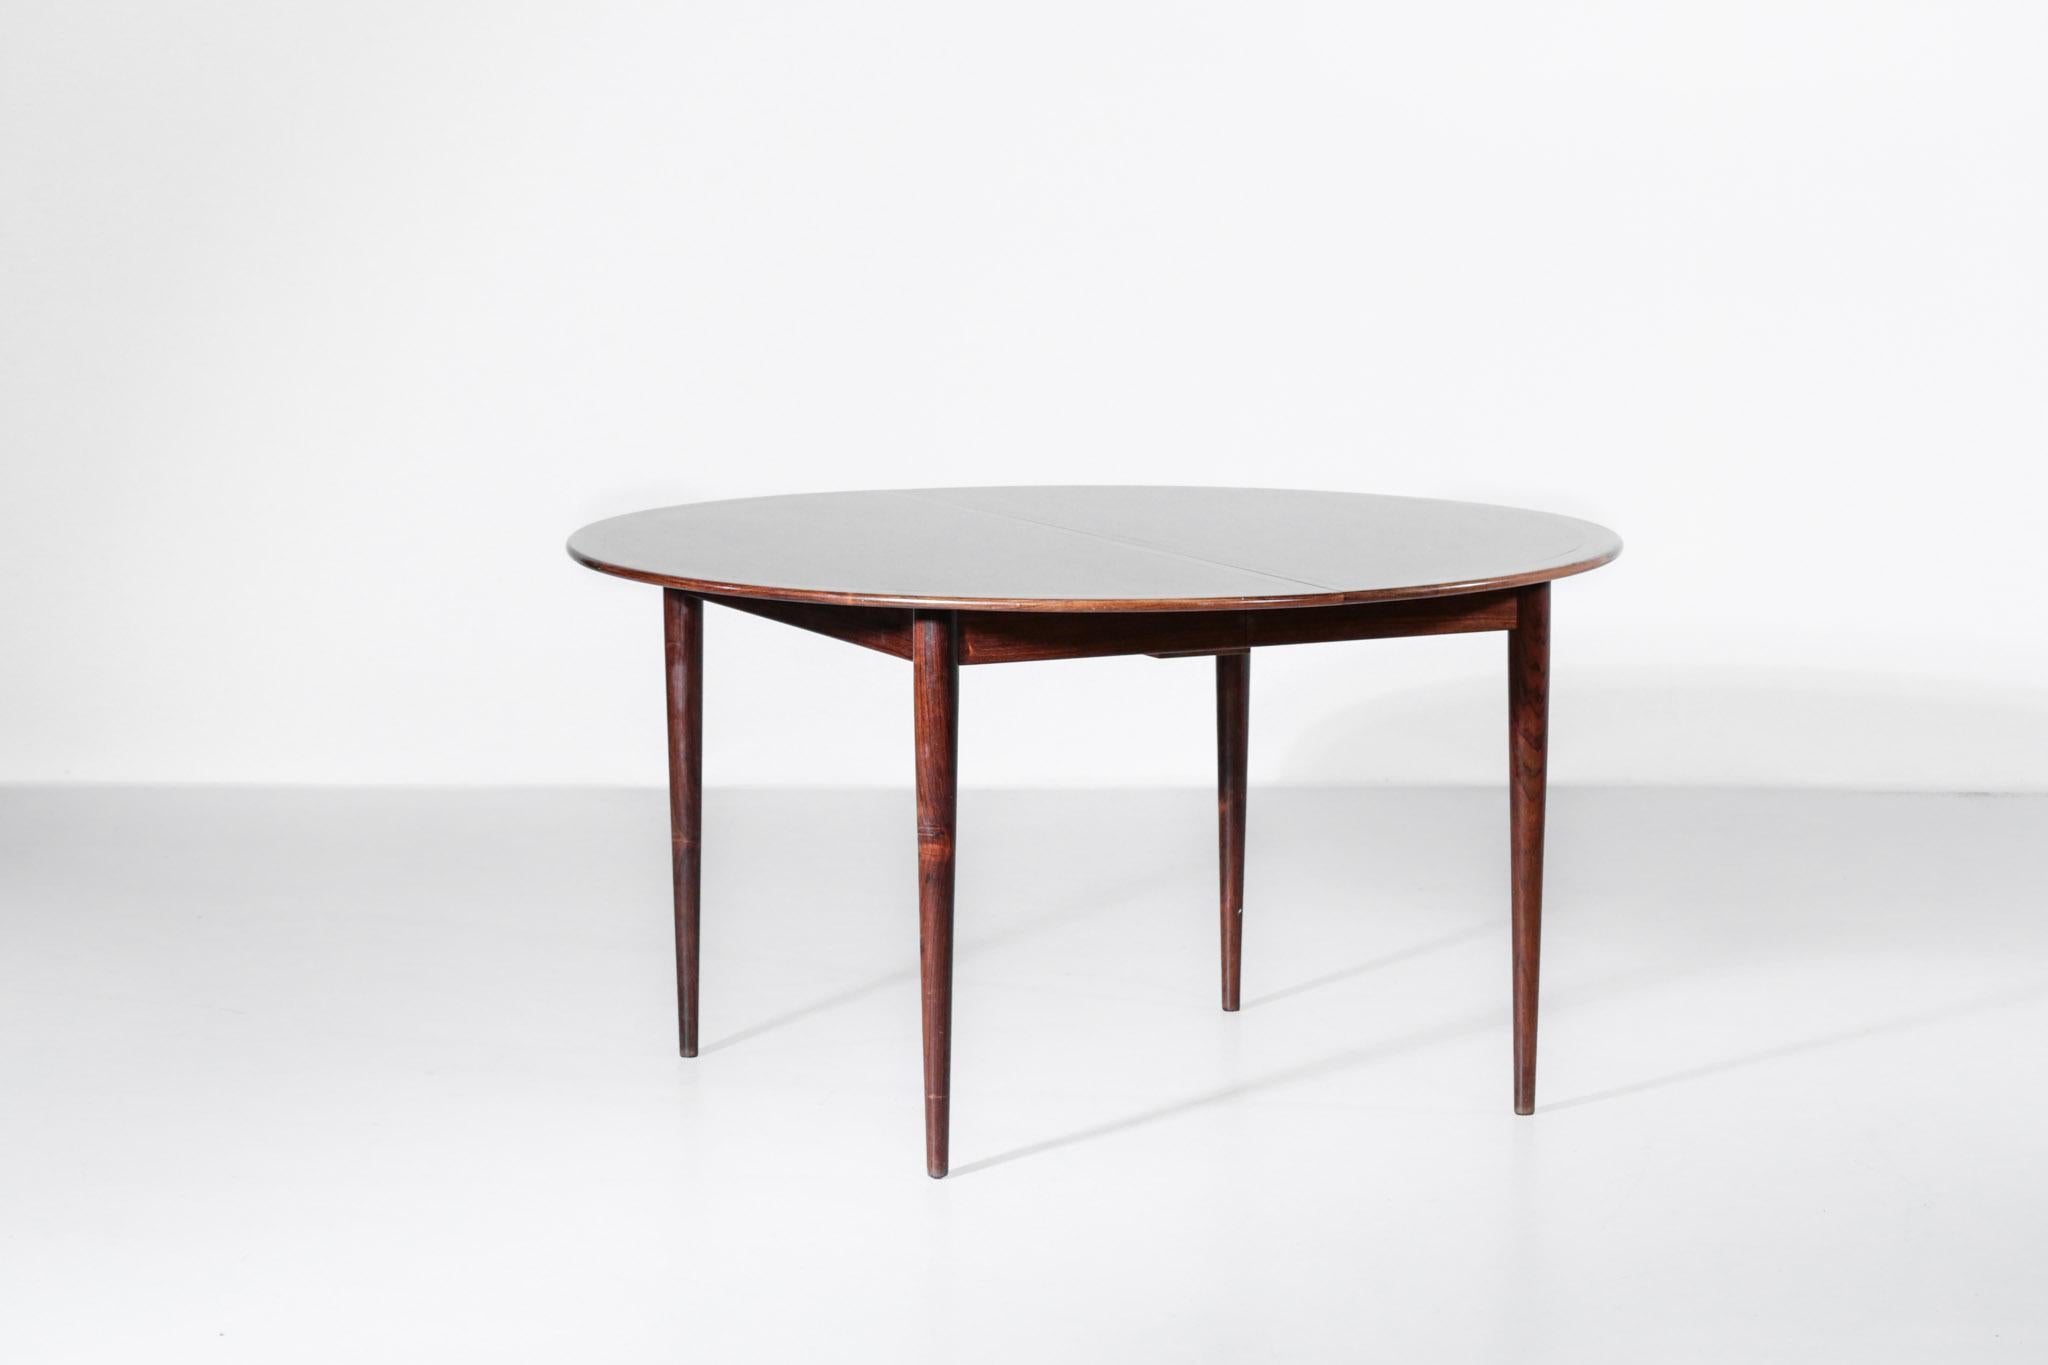 Rare Scandinavian dining table designed by Grete Jalk in rosewood. 2 extensions, measures: 55 cm each. Length from 135 cm to 245 cm (12 peoples) Stamp in the structure.